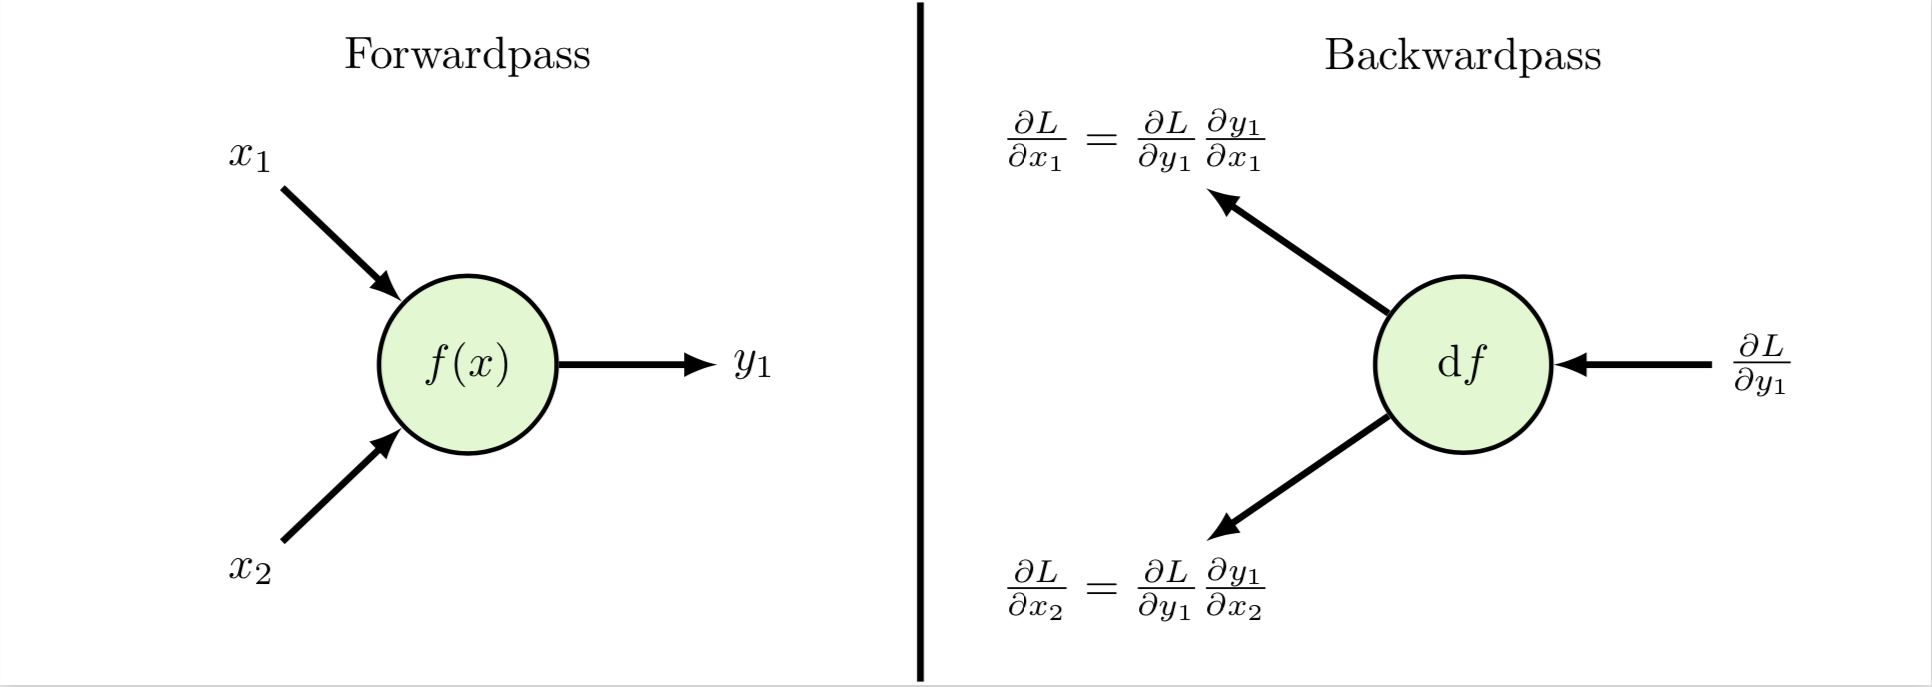 The chain rule applied to one single unit. Image source: Markus Völk.